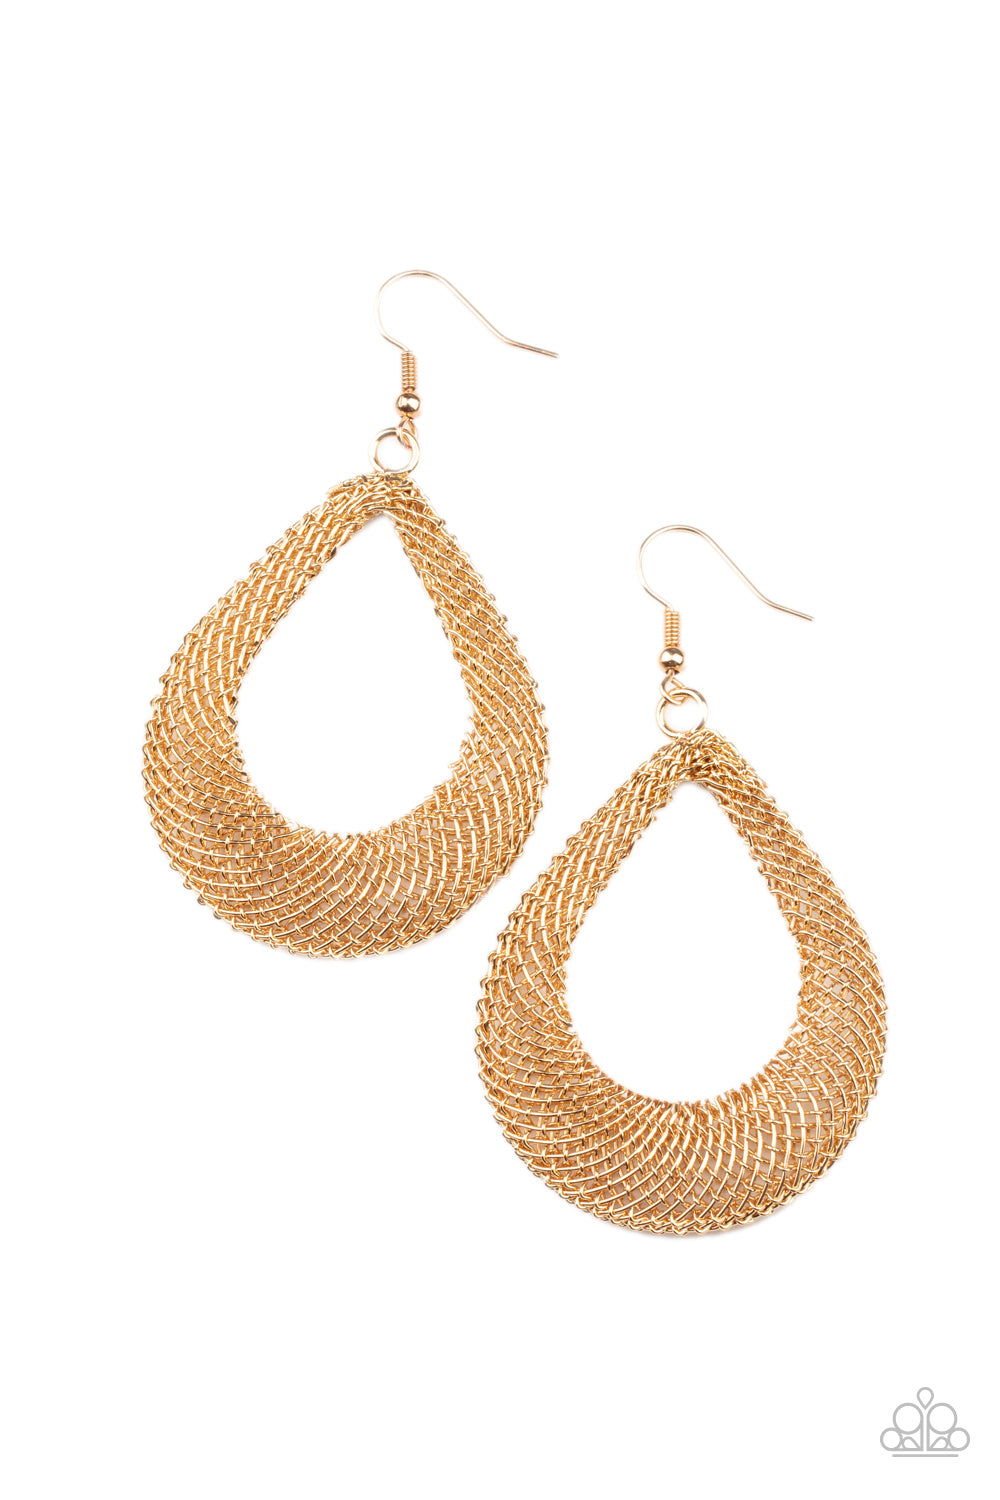 Paparazzi A Hot MESH - Gold Earrings - A Finishing Touch Jewelry Paparazzi jewelry images